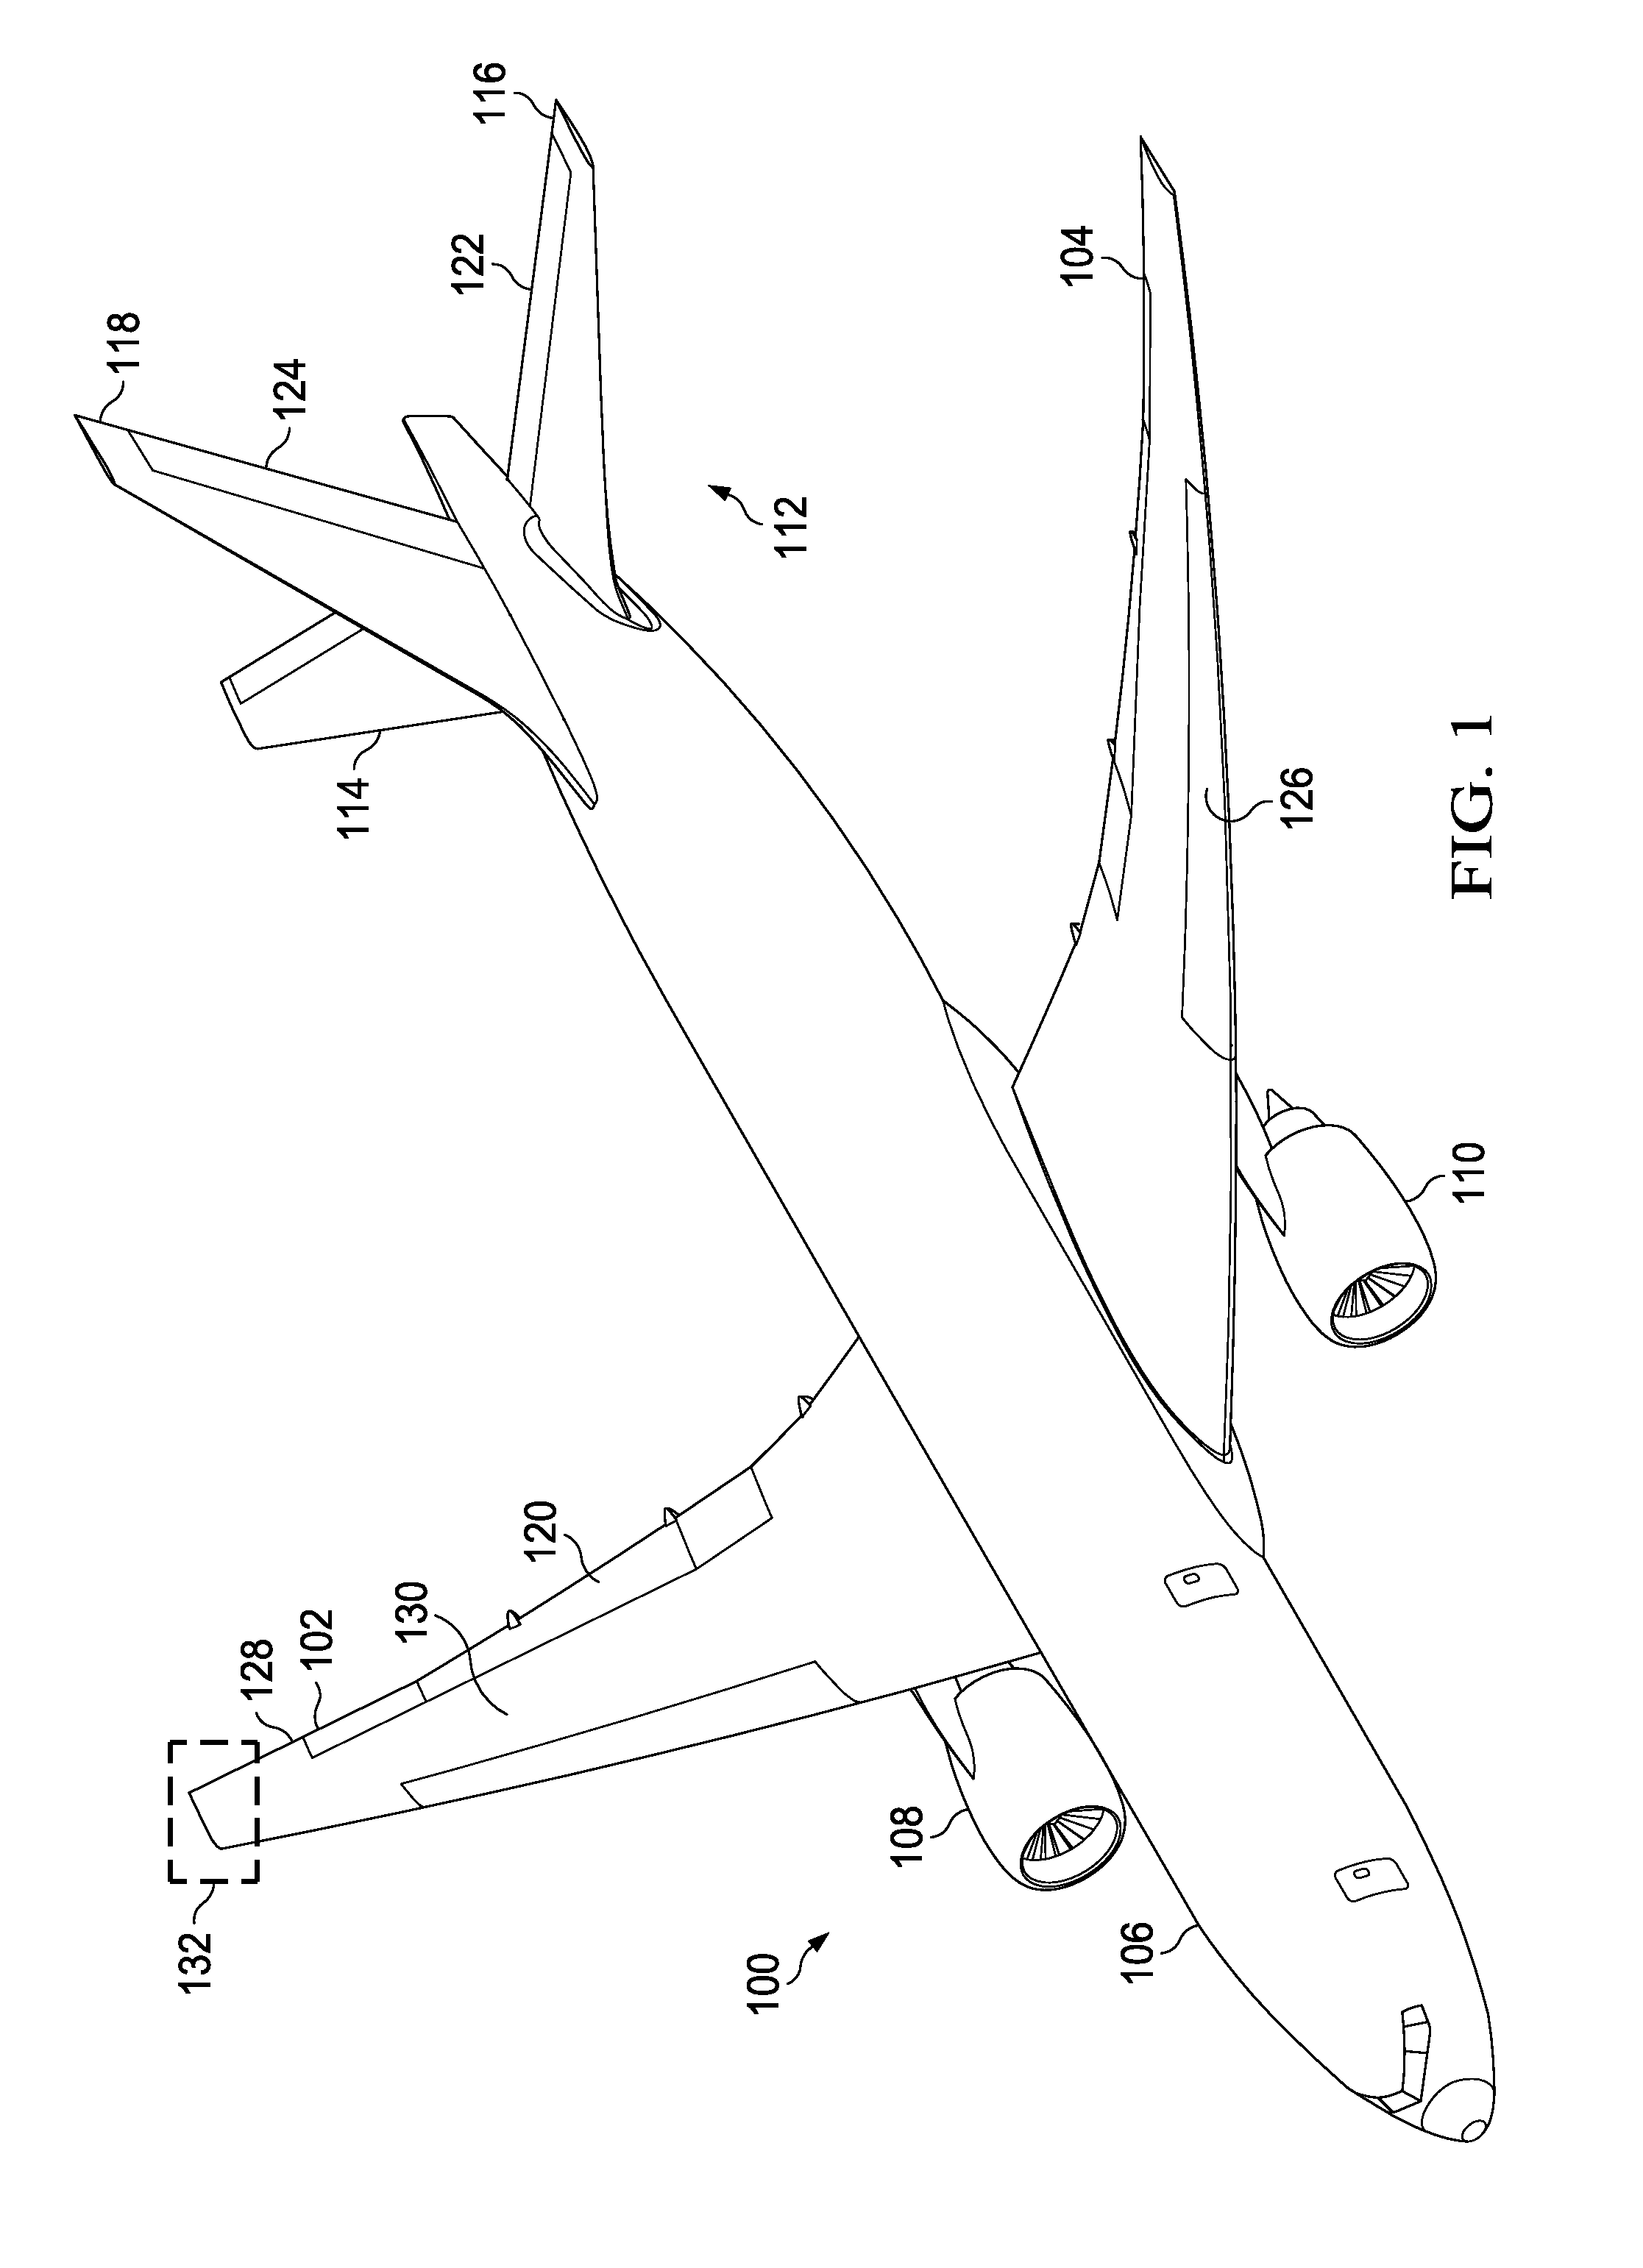 Shape Memory Alloy Actuator System for Composite Aircraft Structures